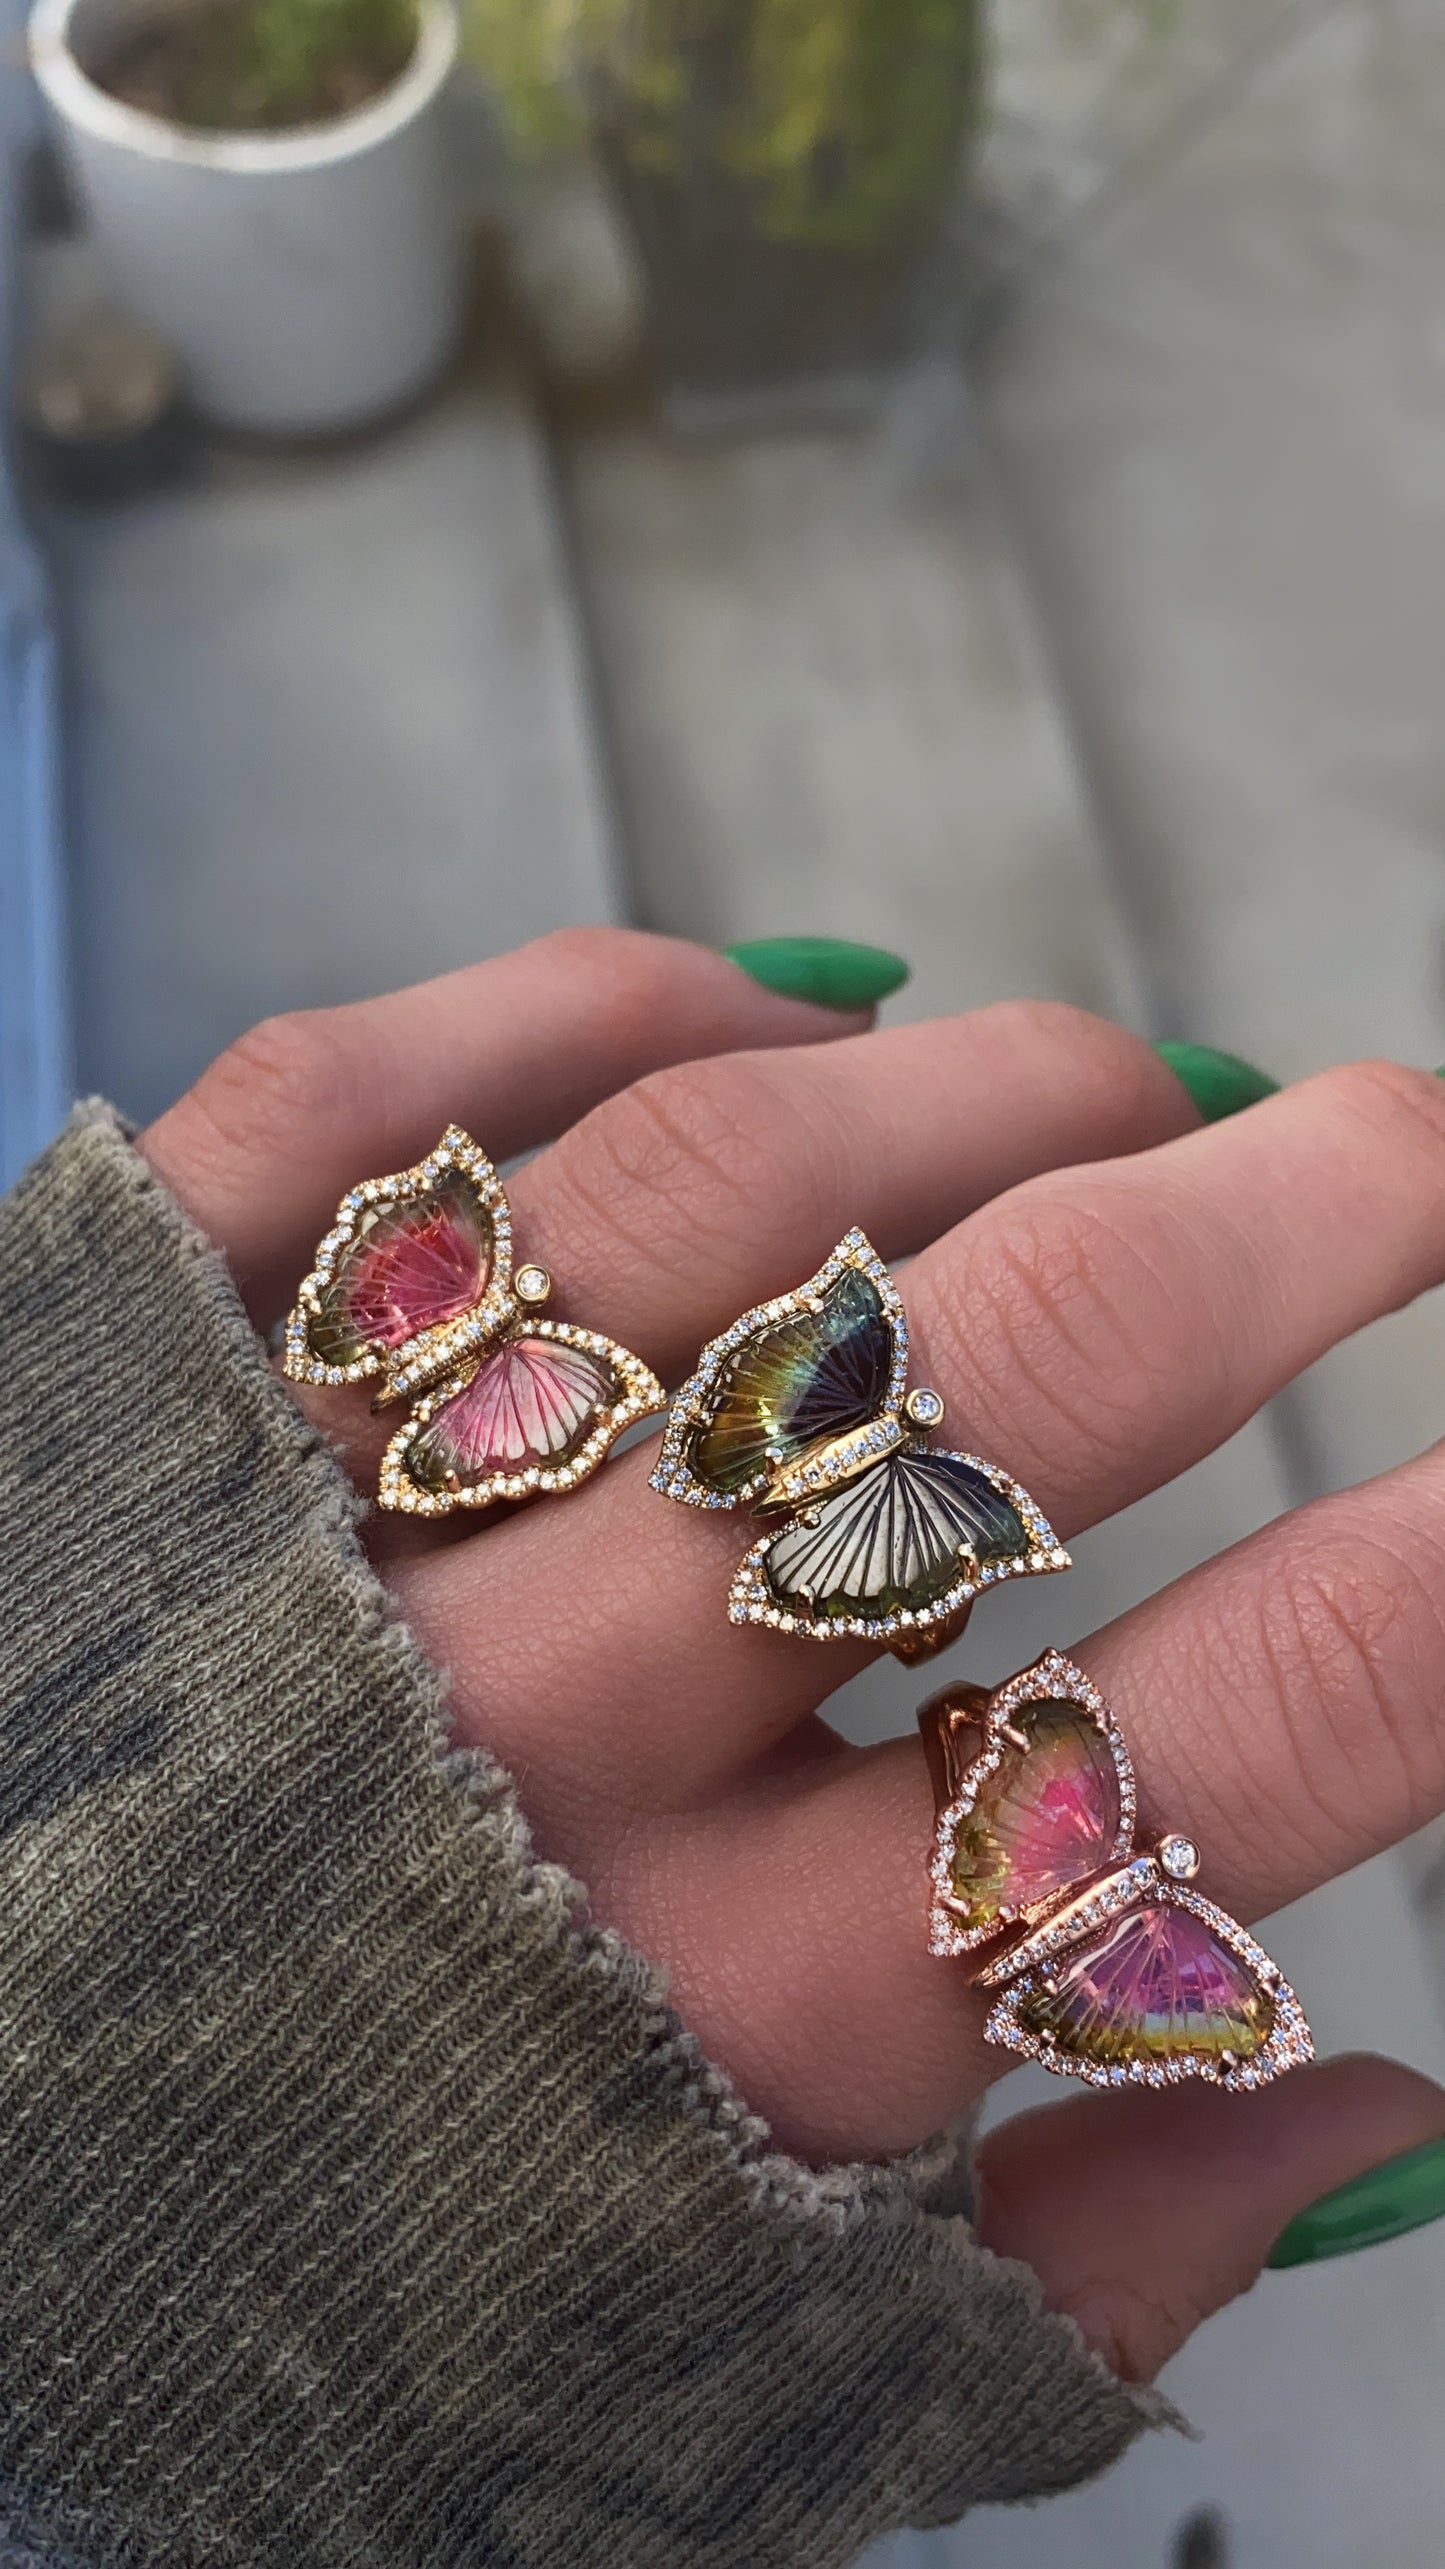 14kt gold and diamond watermelon tourmaline butterfly ring